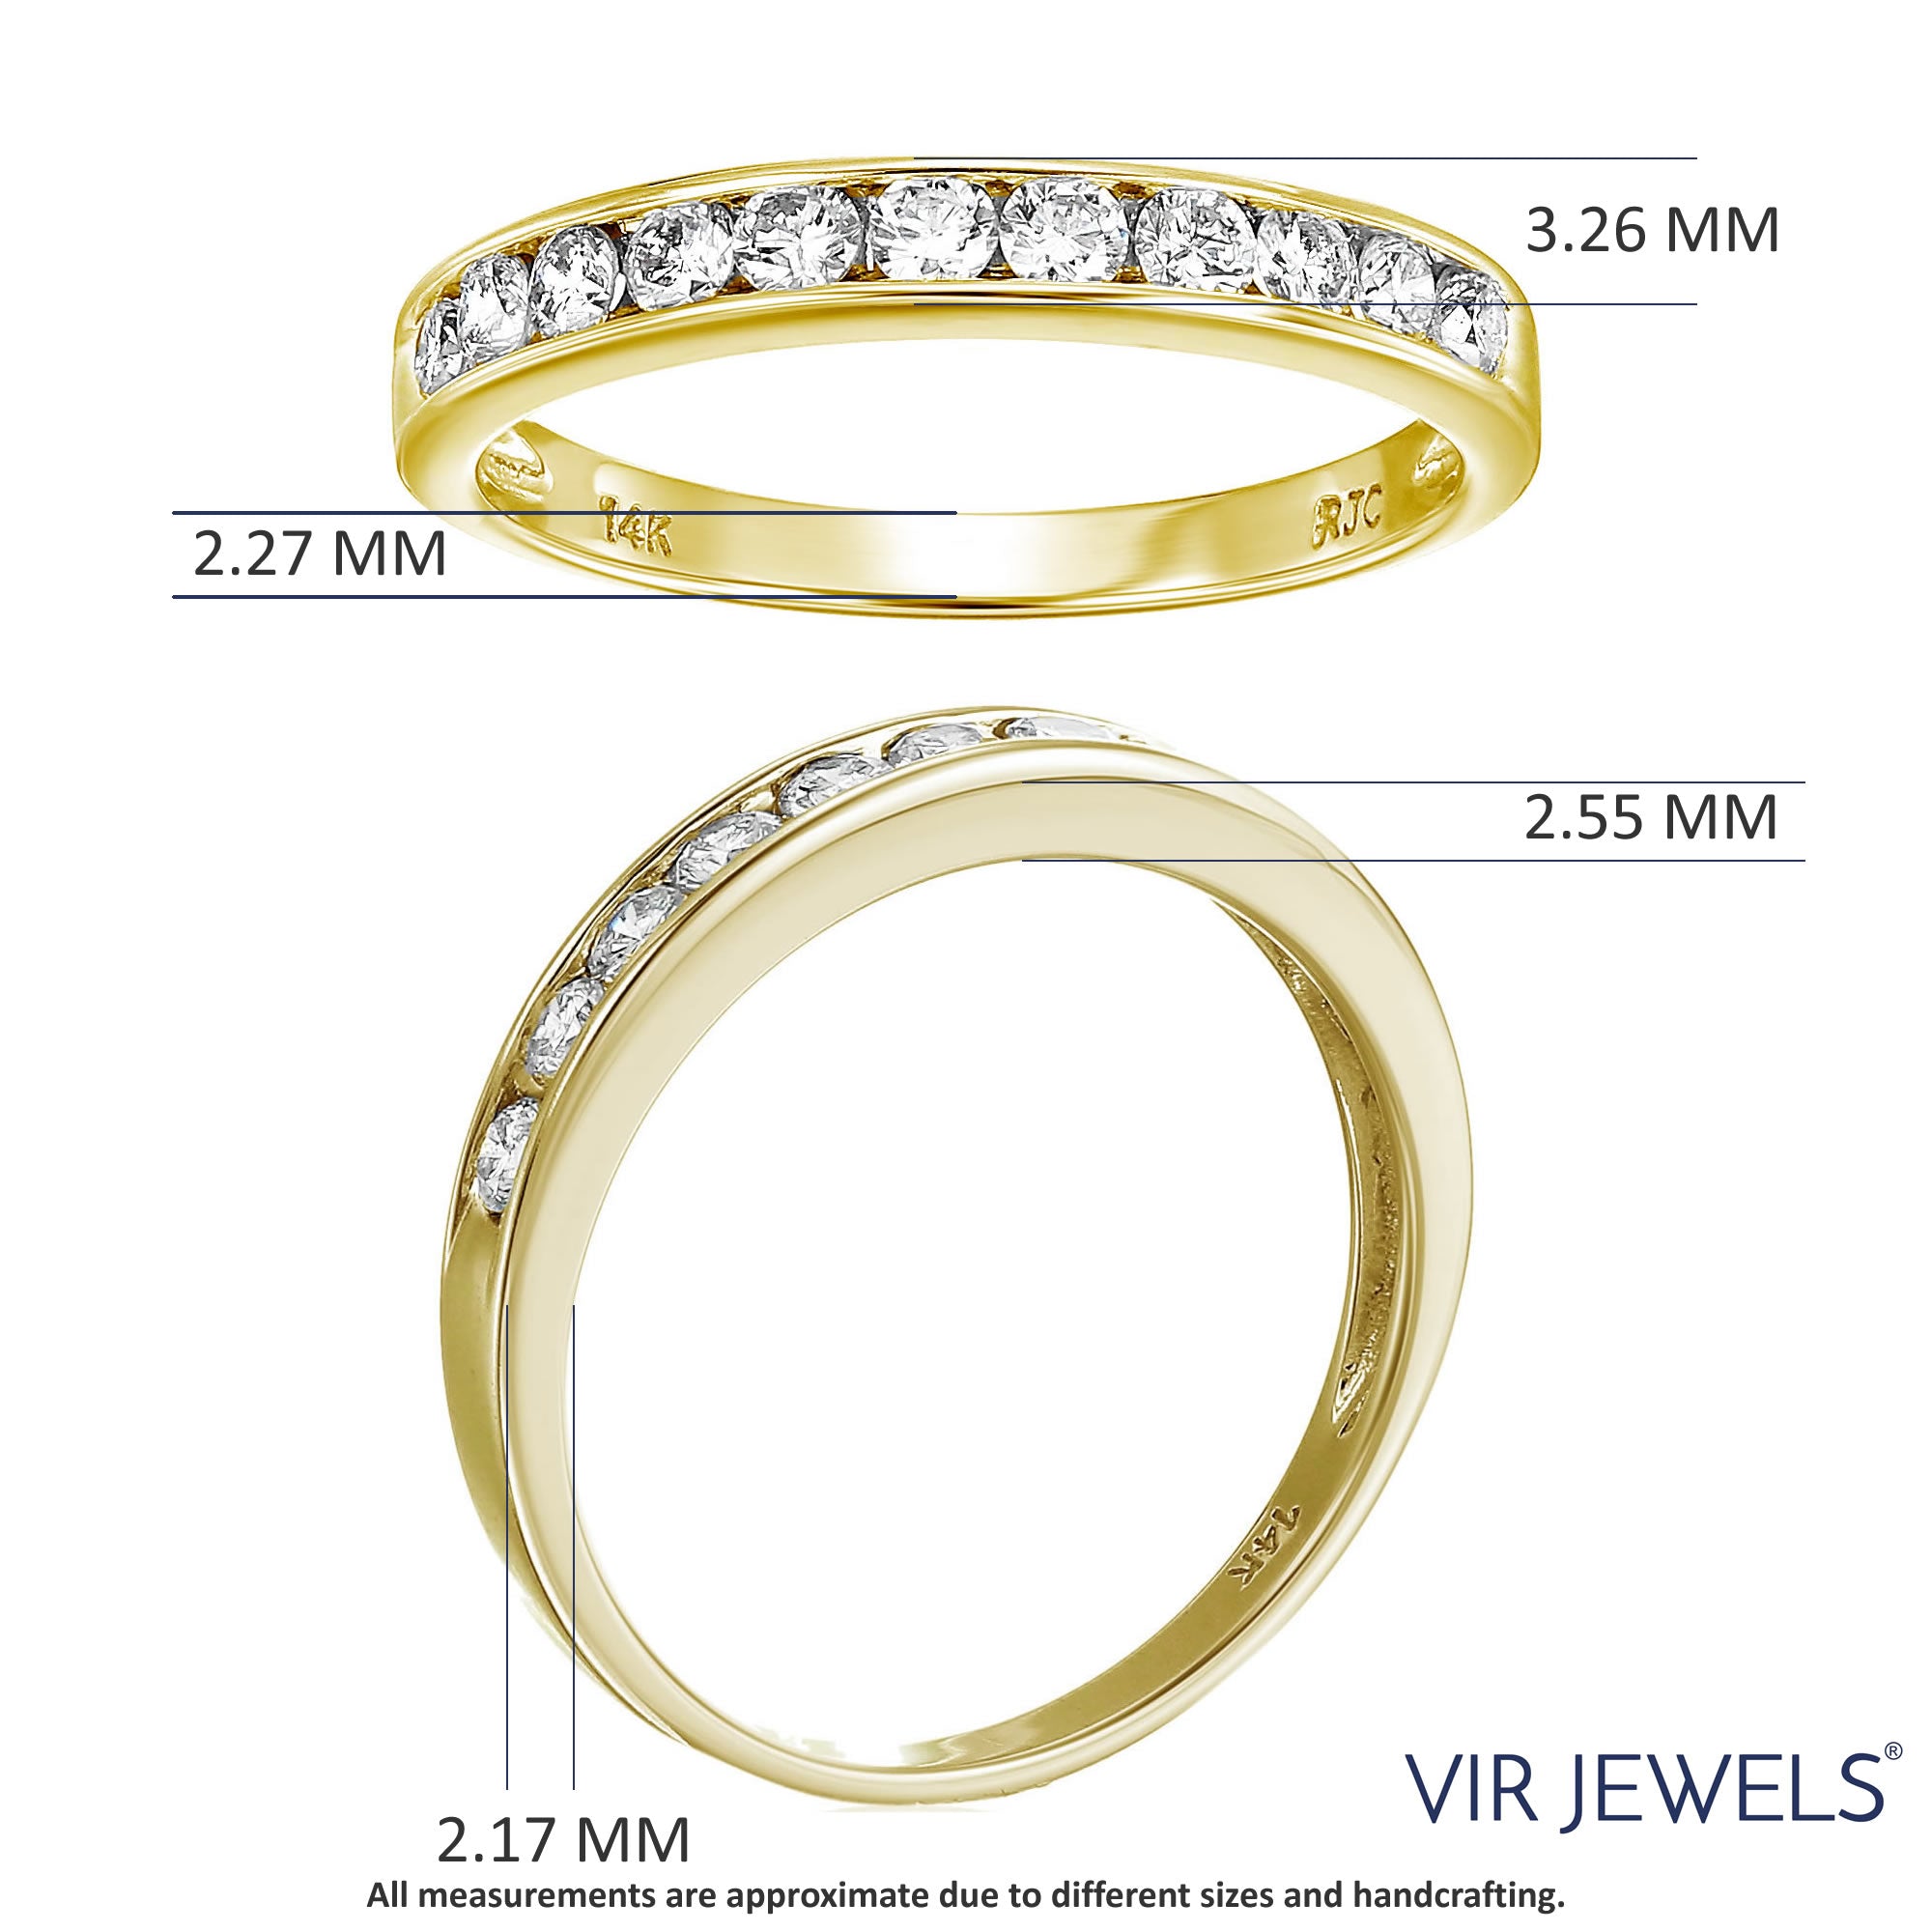 3/4 cttw Diamond Wedding Band for Women, Classic Diamond Wedding Band in 14K Yellow Gold Channel Set, Size 4.5-10